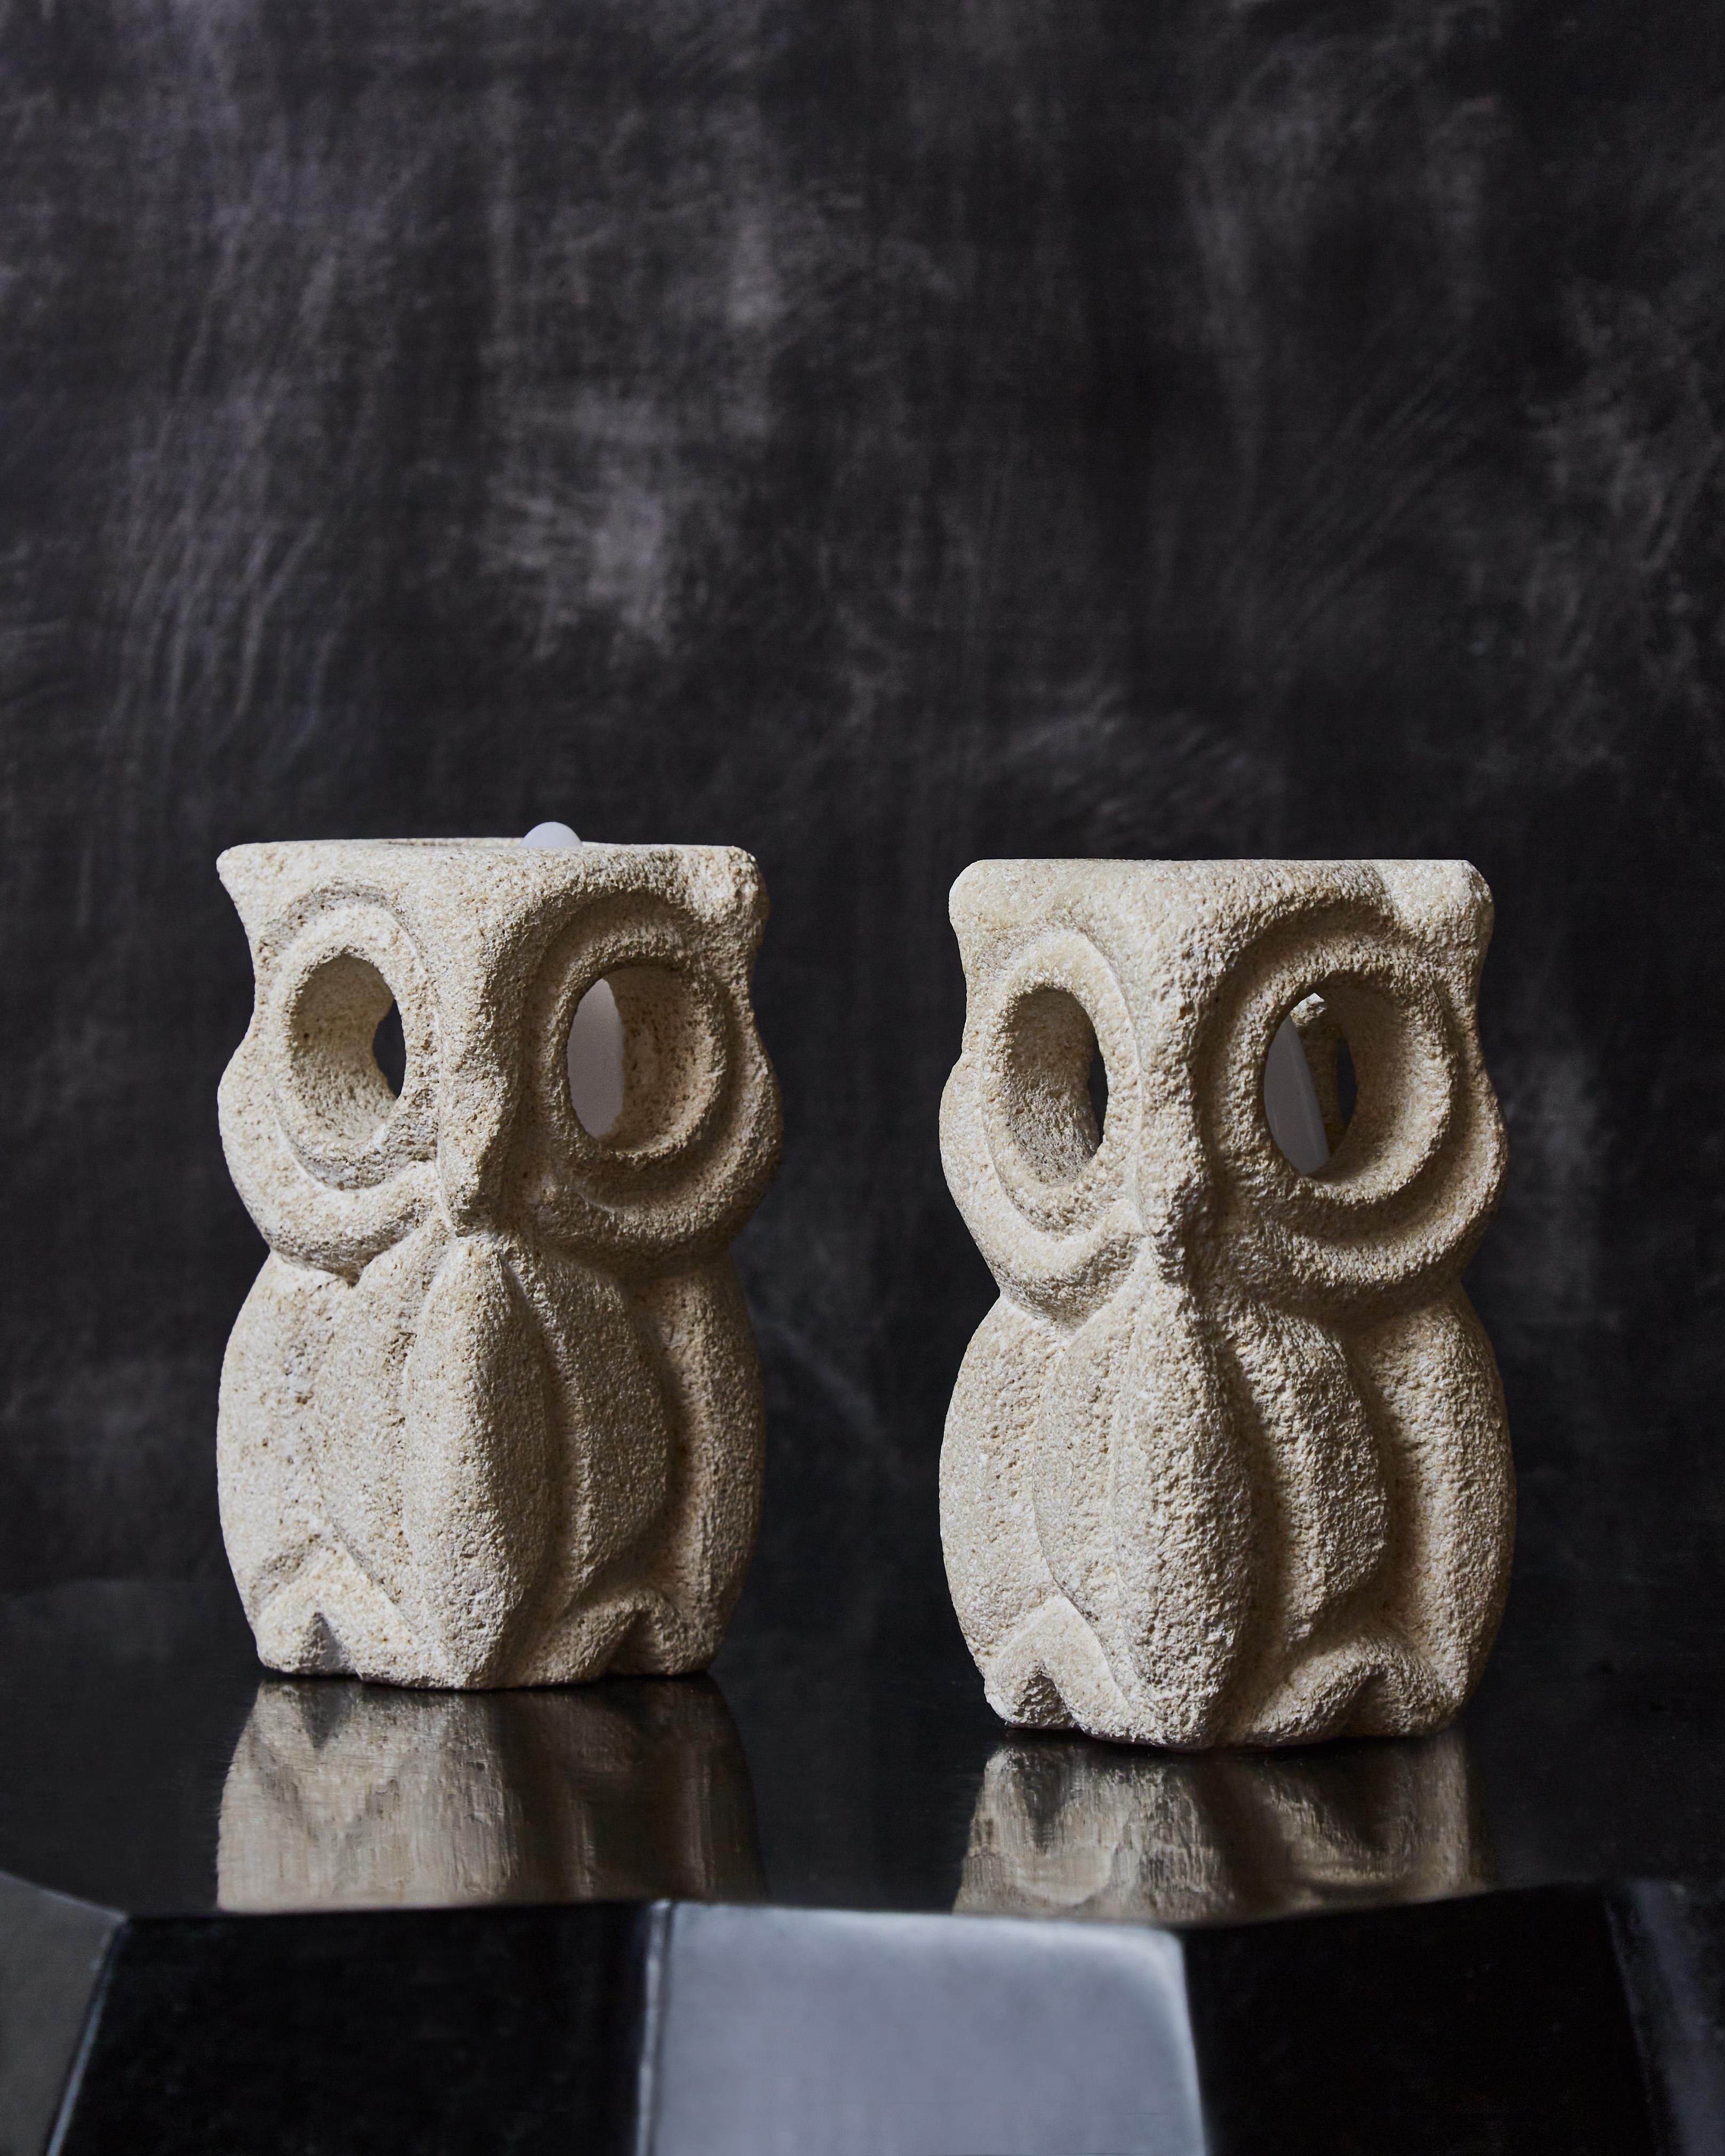 Pair of tiny stylized owl table lamps made in sandstone by the French artist Albert Tormos.

Albert Tormos is a French sculptor painter and poet, known for his lamps and objects made of carved sandstone. At the end of the 1960’s through the